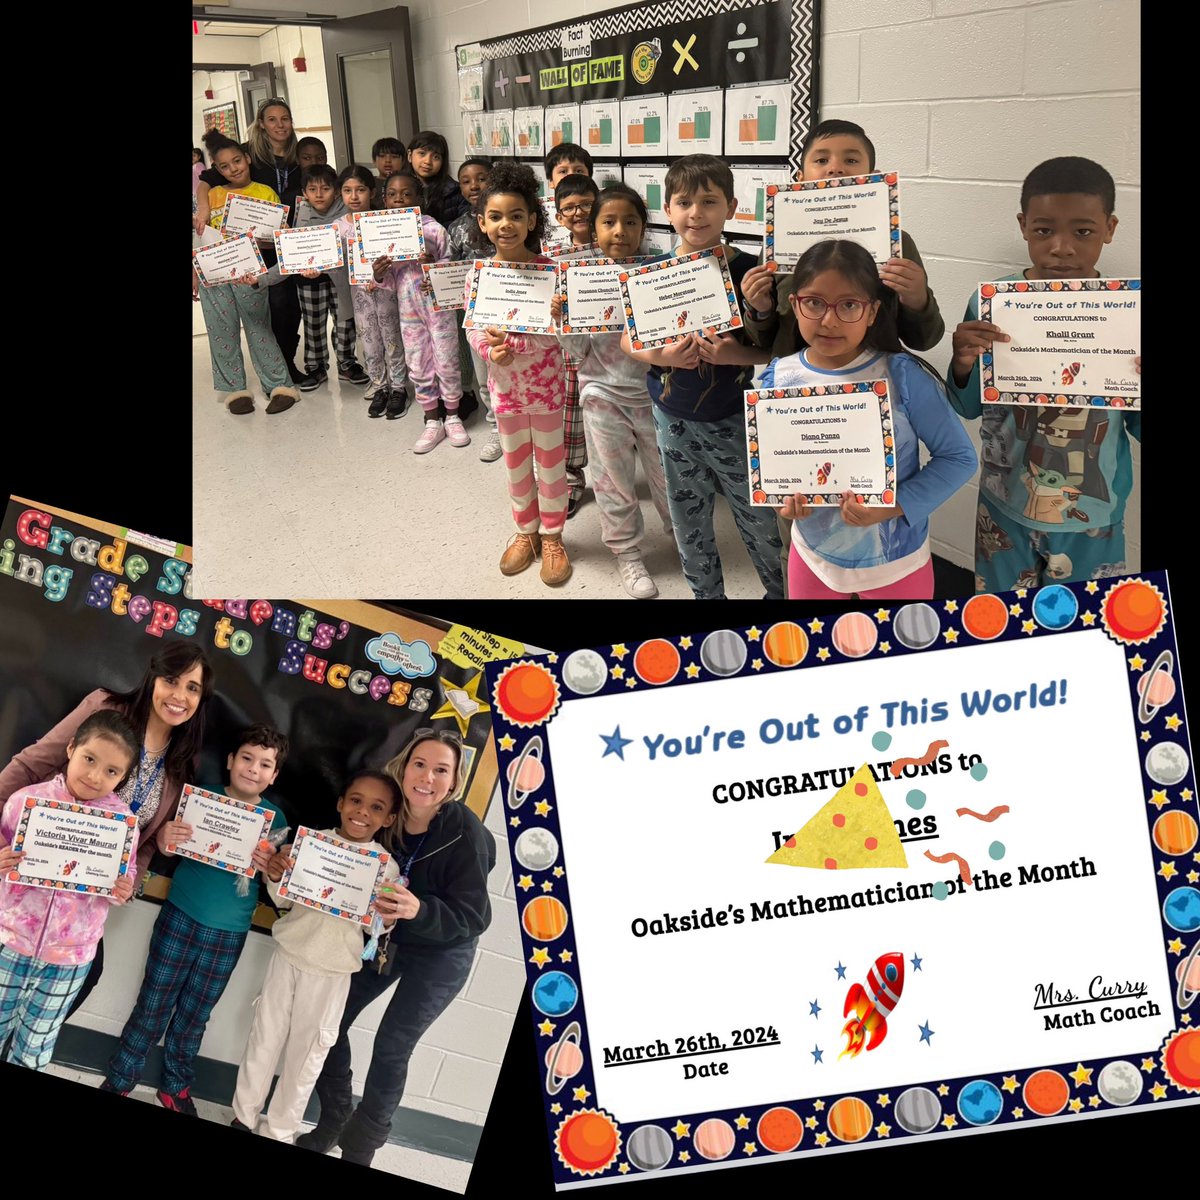 Today we celebrated our Mathematicians of the Month! Mathematics is not only about numbers, equations, or algorithms. It's about perseverance, creativity, and the thrill of solving problems!